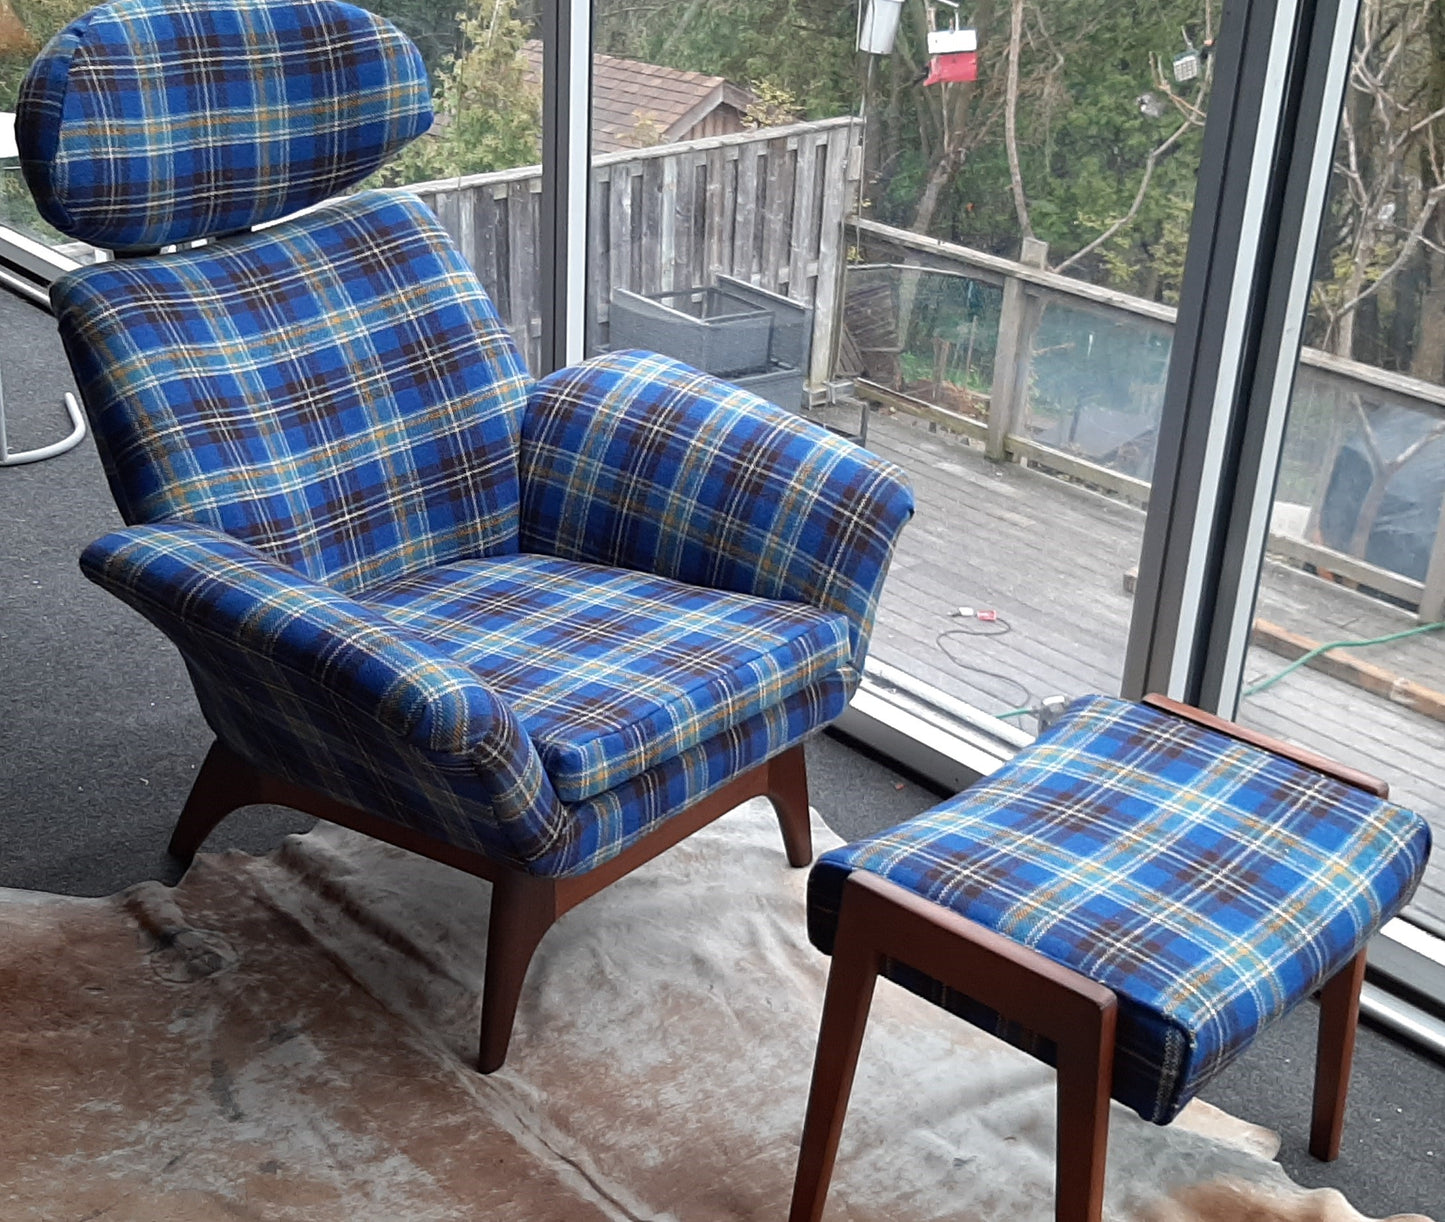 REFINISHED REUPHOLSTERED Adrian Pearsall style Teak  Lounge Chair and ottoman in Maharam plaid wool PERFECT - Mid Century Modern Toronto